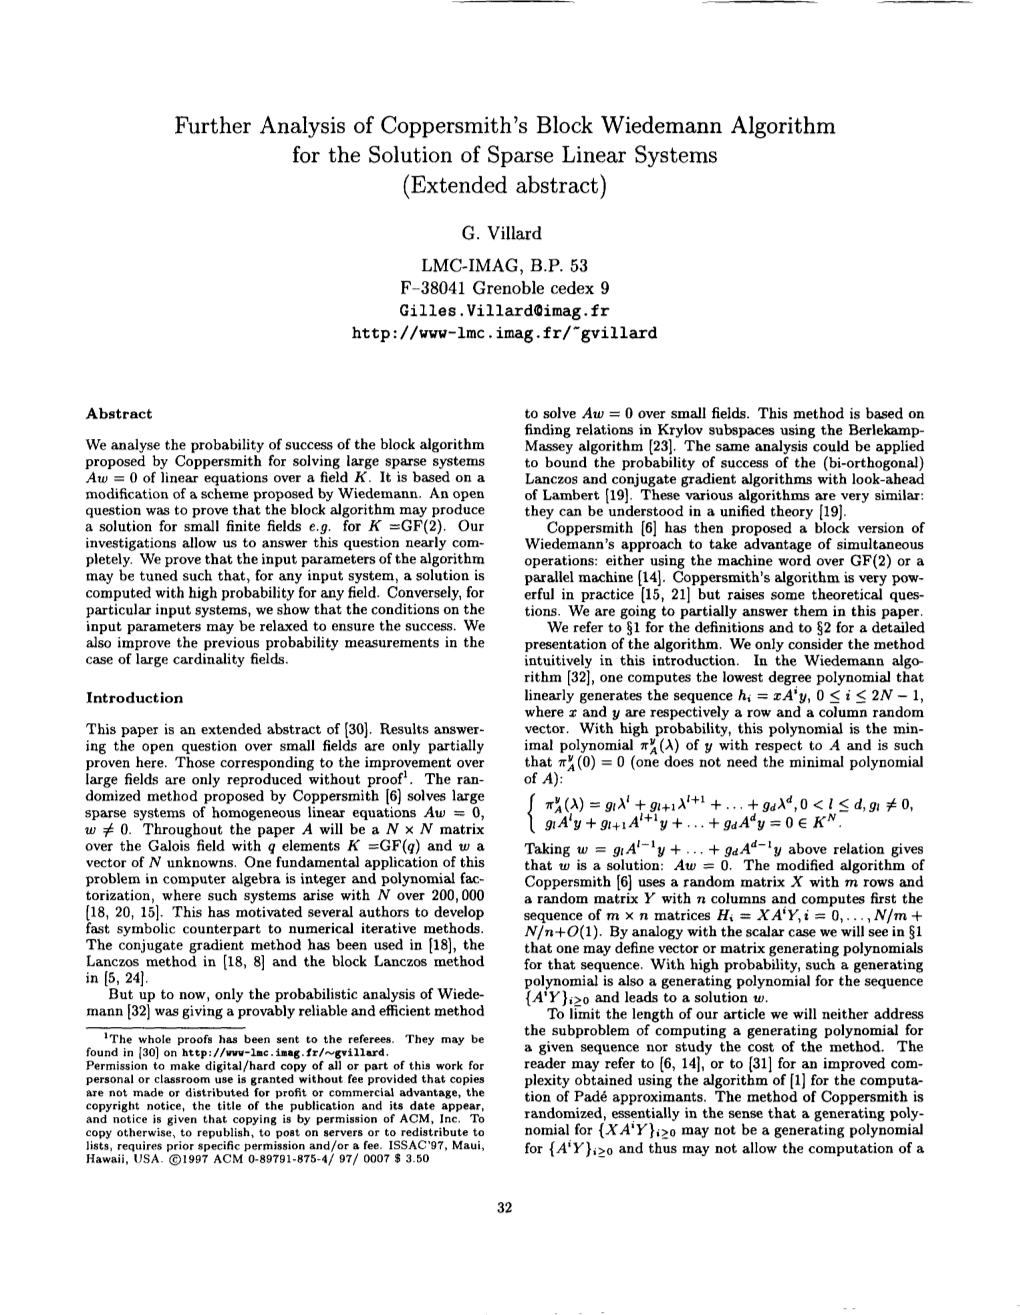 Further Analysis of Coppersmith's Block Wiedemann Algorithm for the Solution of Sparse Linear Systems (Extended Abstract)